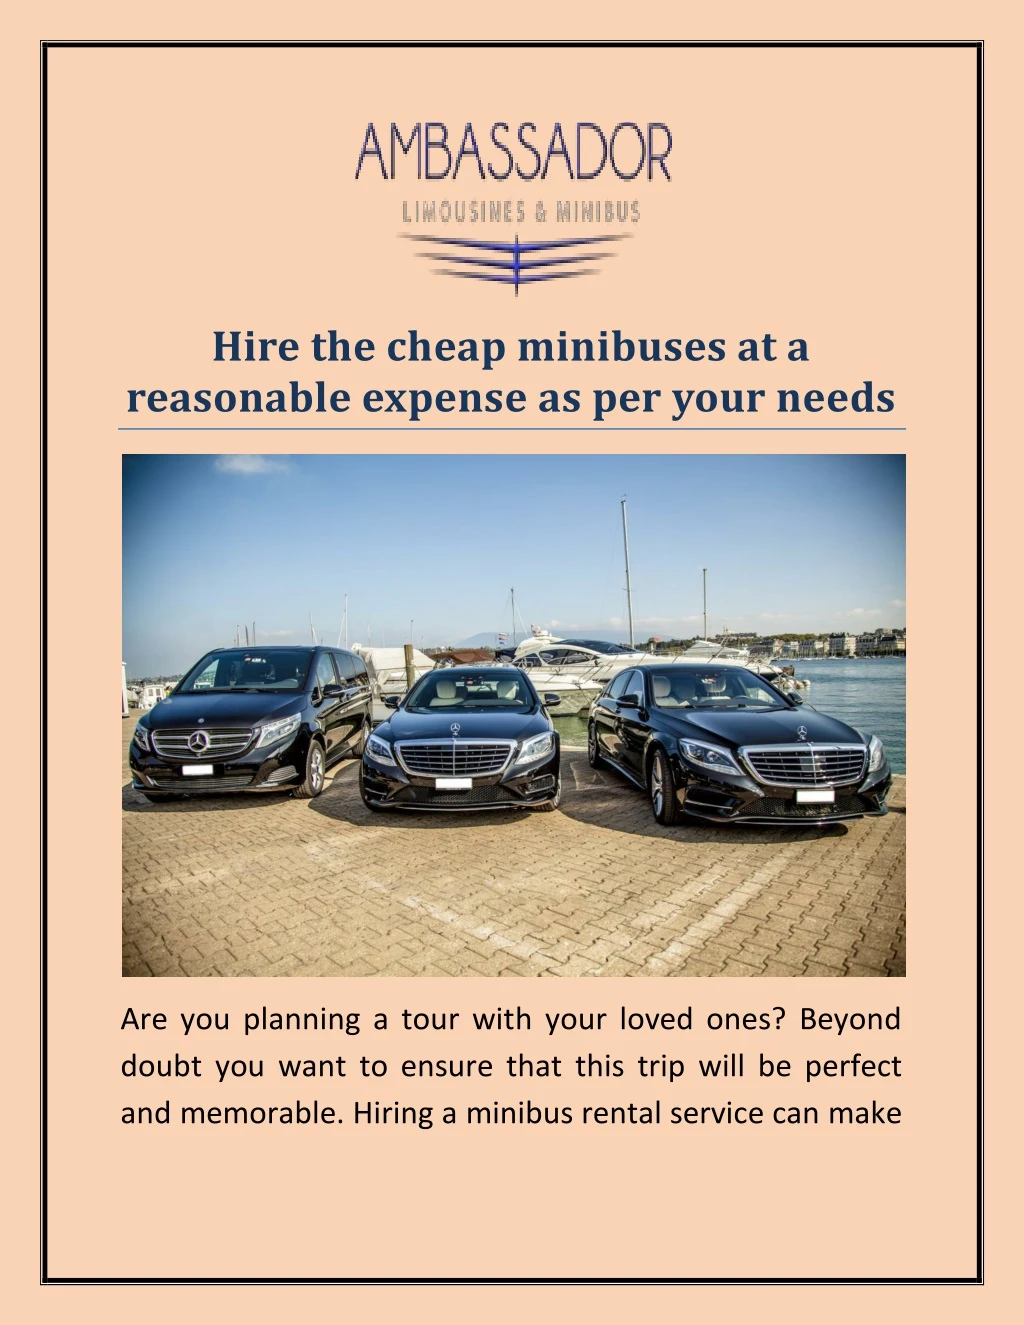 hire the cheap minibuses at a reasonable expense